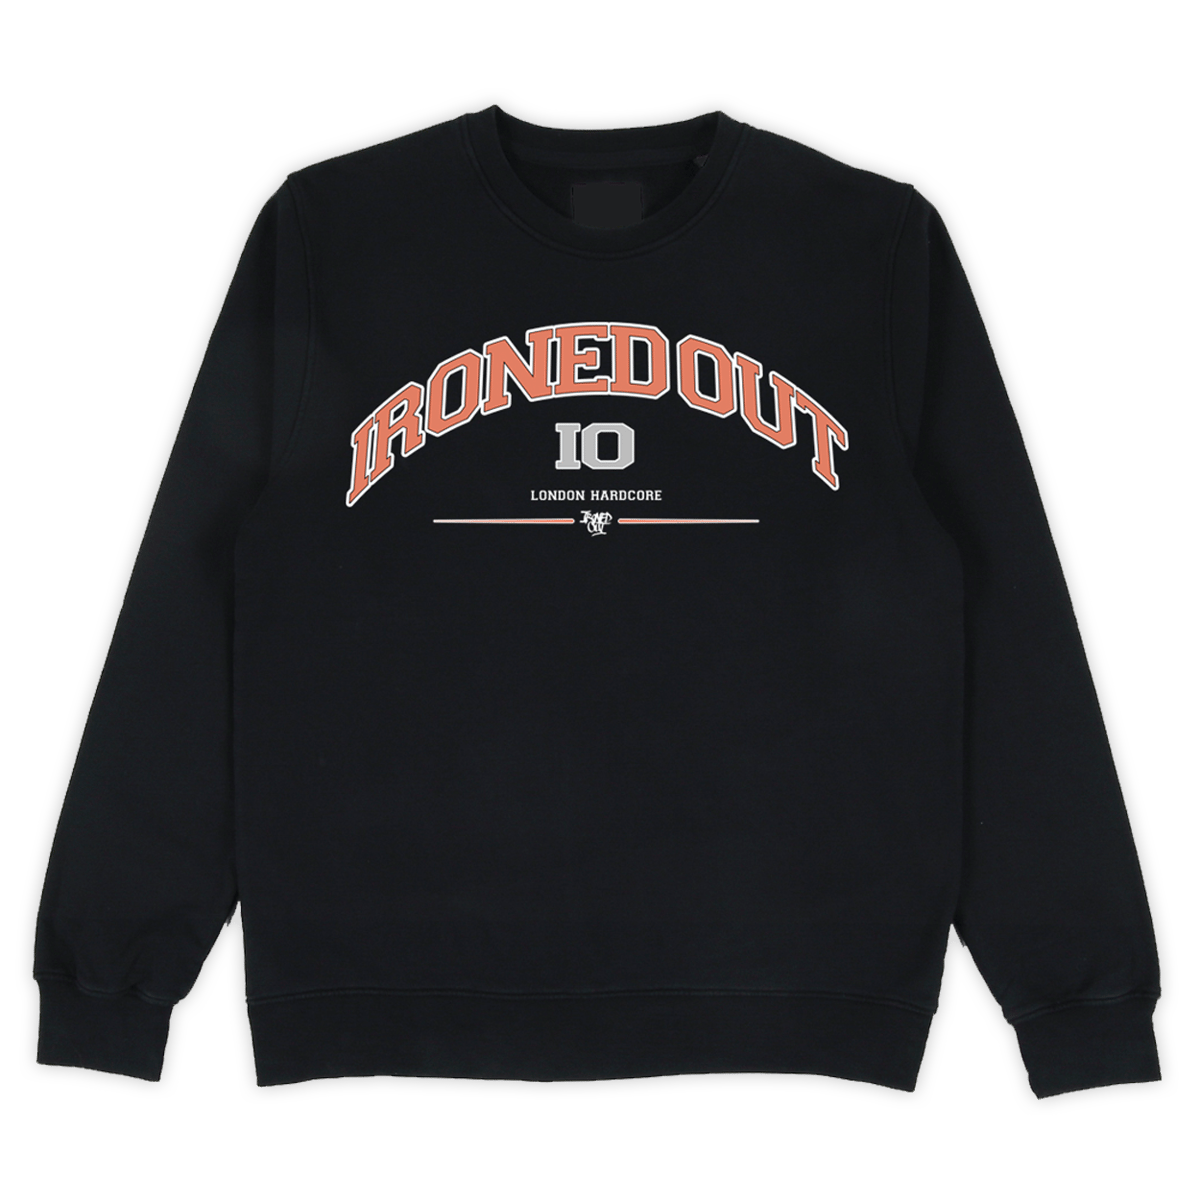 Ironed Out Crewneck Sweatshirt [BLACK] | Ironed Out